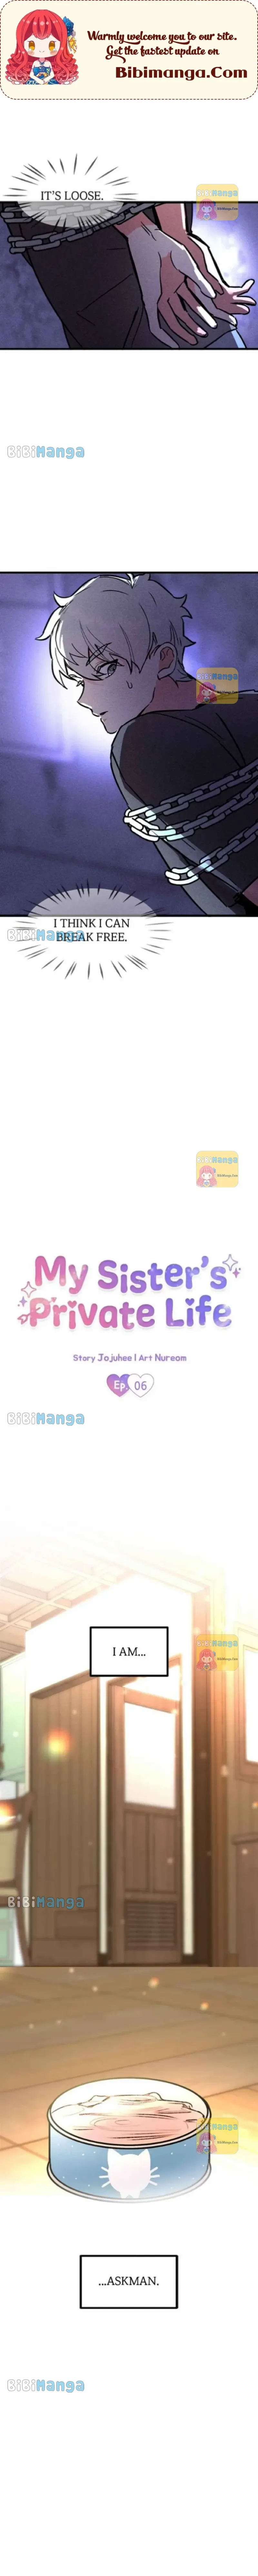 My Sister’S Private Life - Page 2